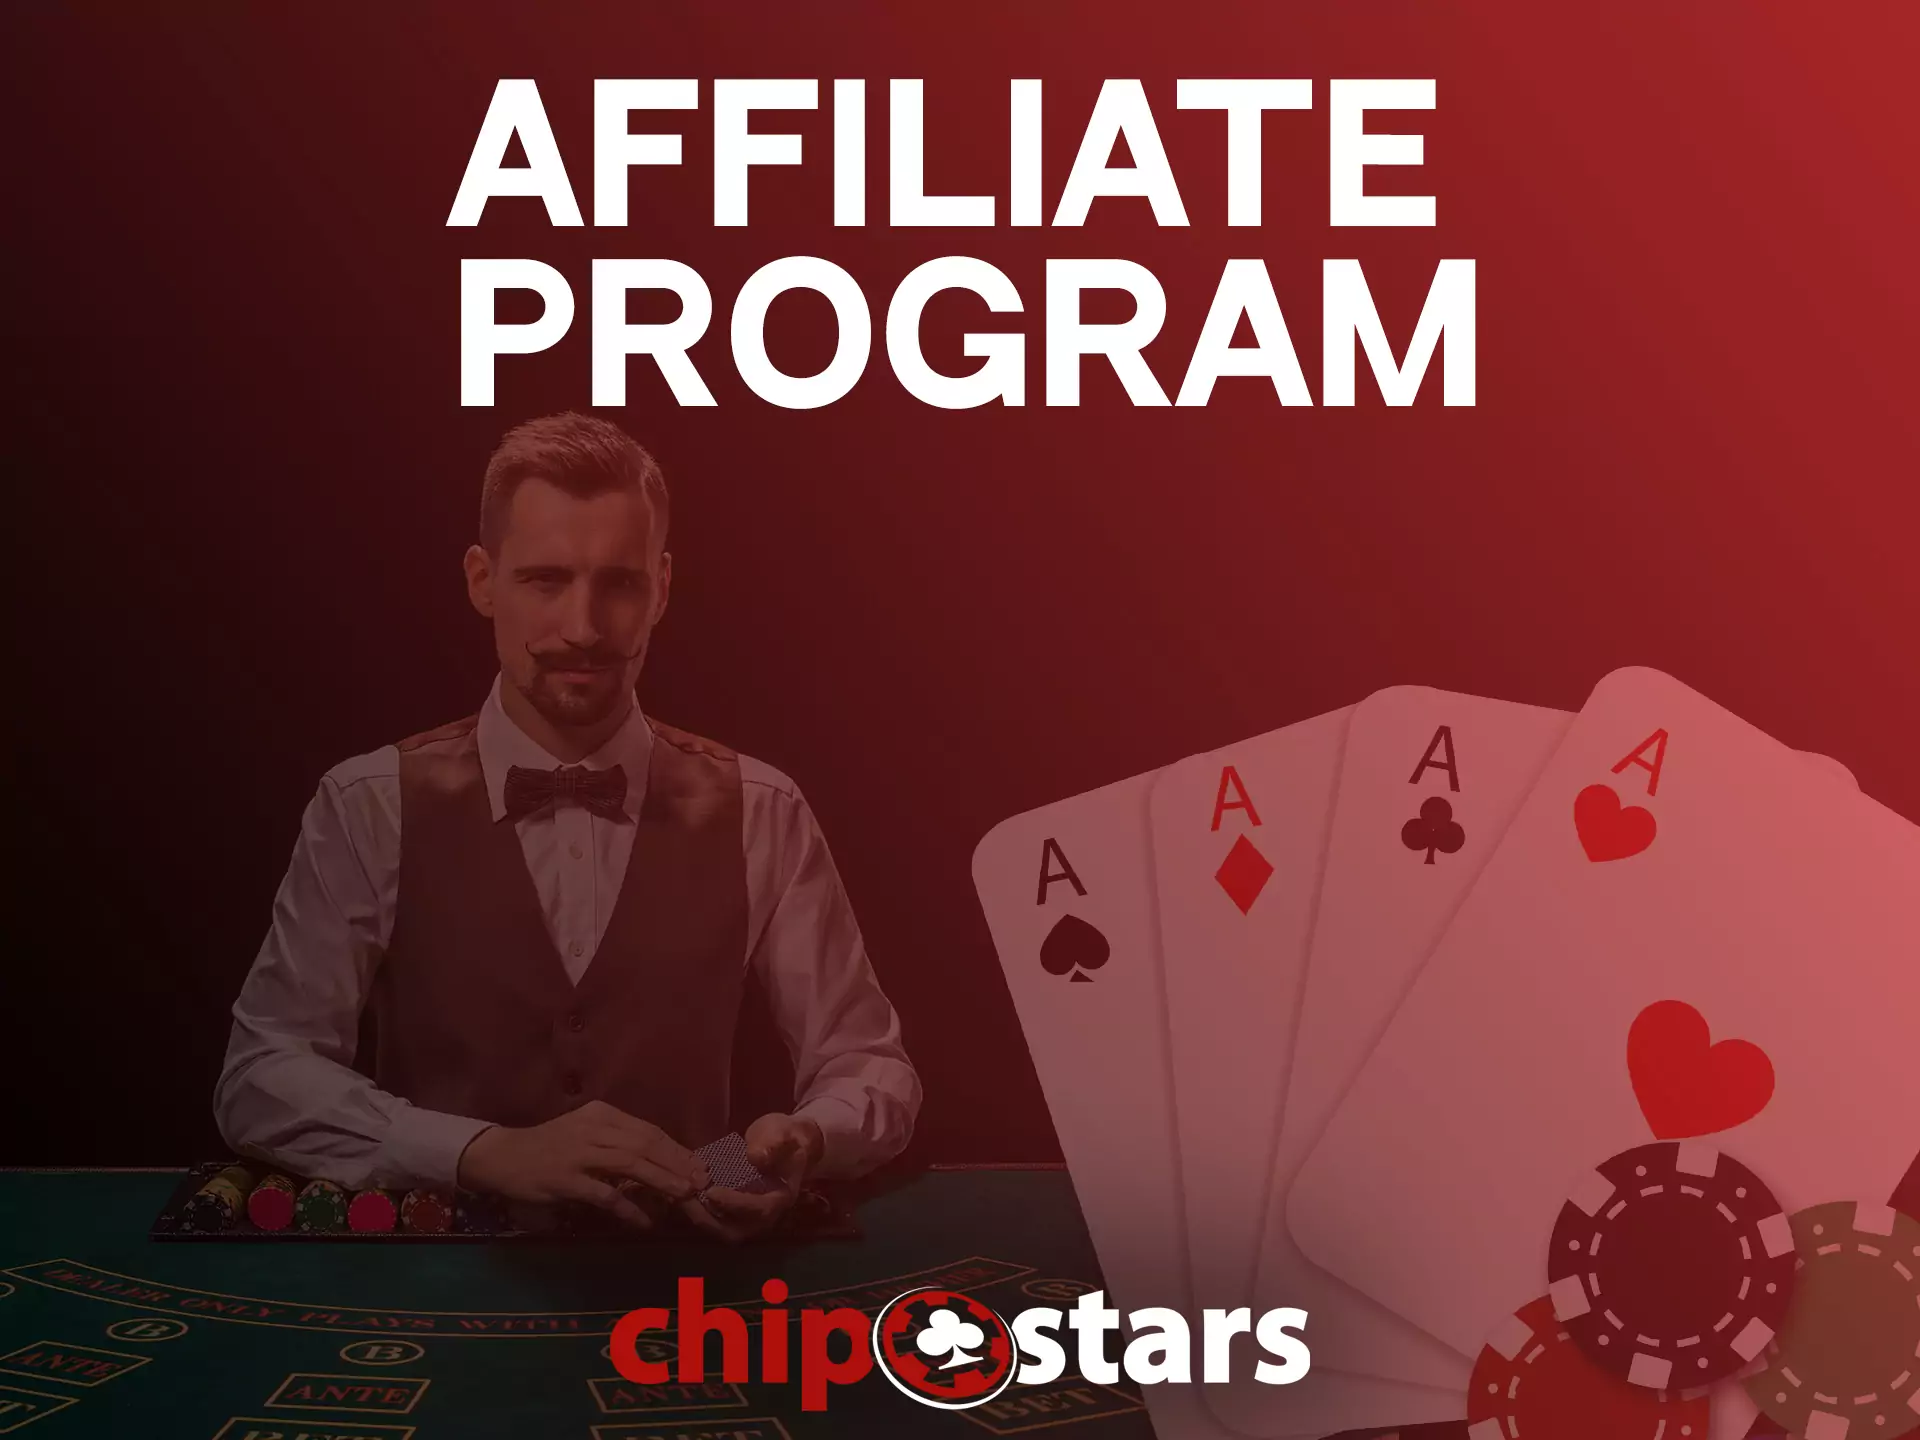 Users of Chipstars can share profit with the bookmaker according to the rules of the Affiliate Program.